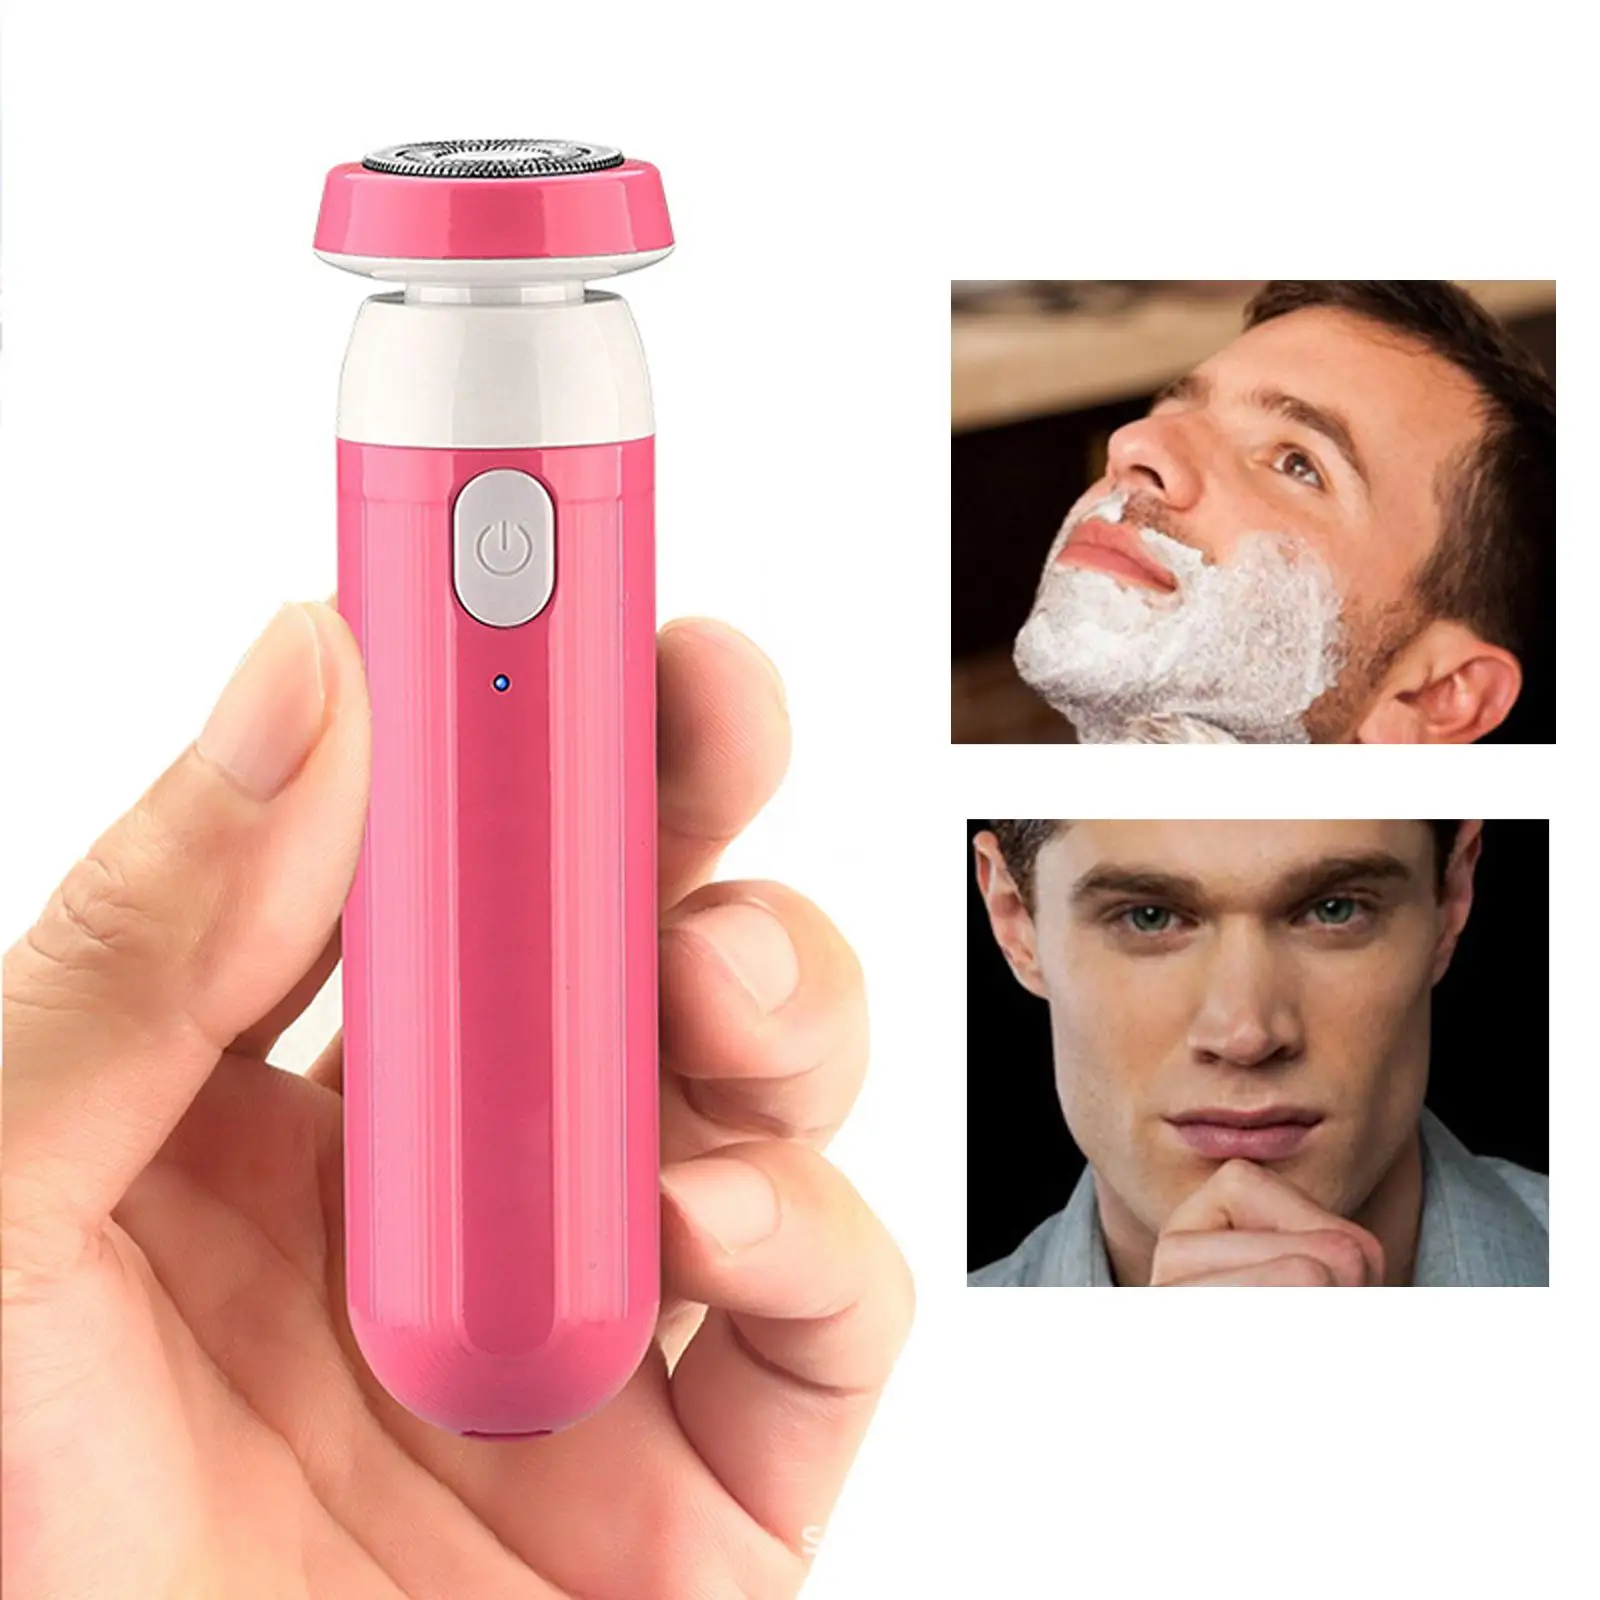 Compact Portable Electric Shaver Detachable Head LED Indicator Turbine Rotating Blade Rotary Razor for Men Women Wet Dry Use